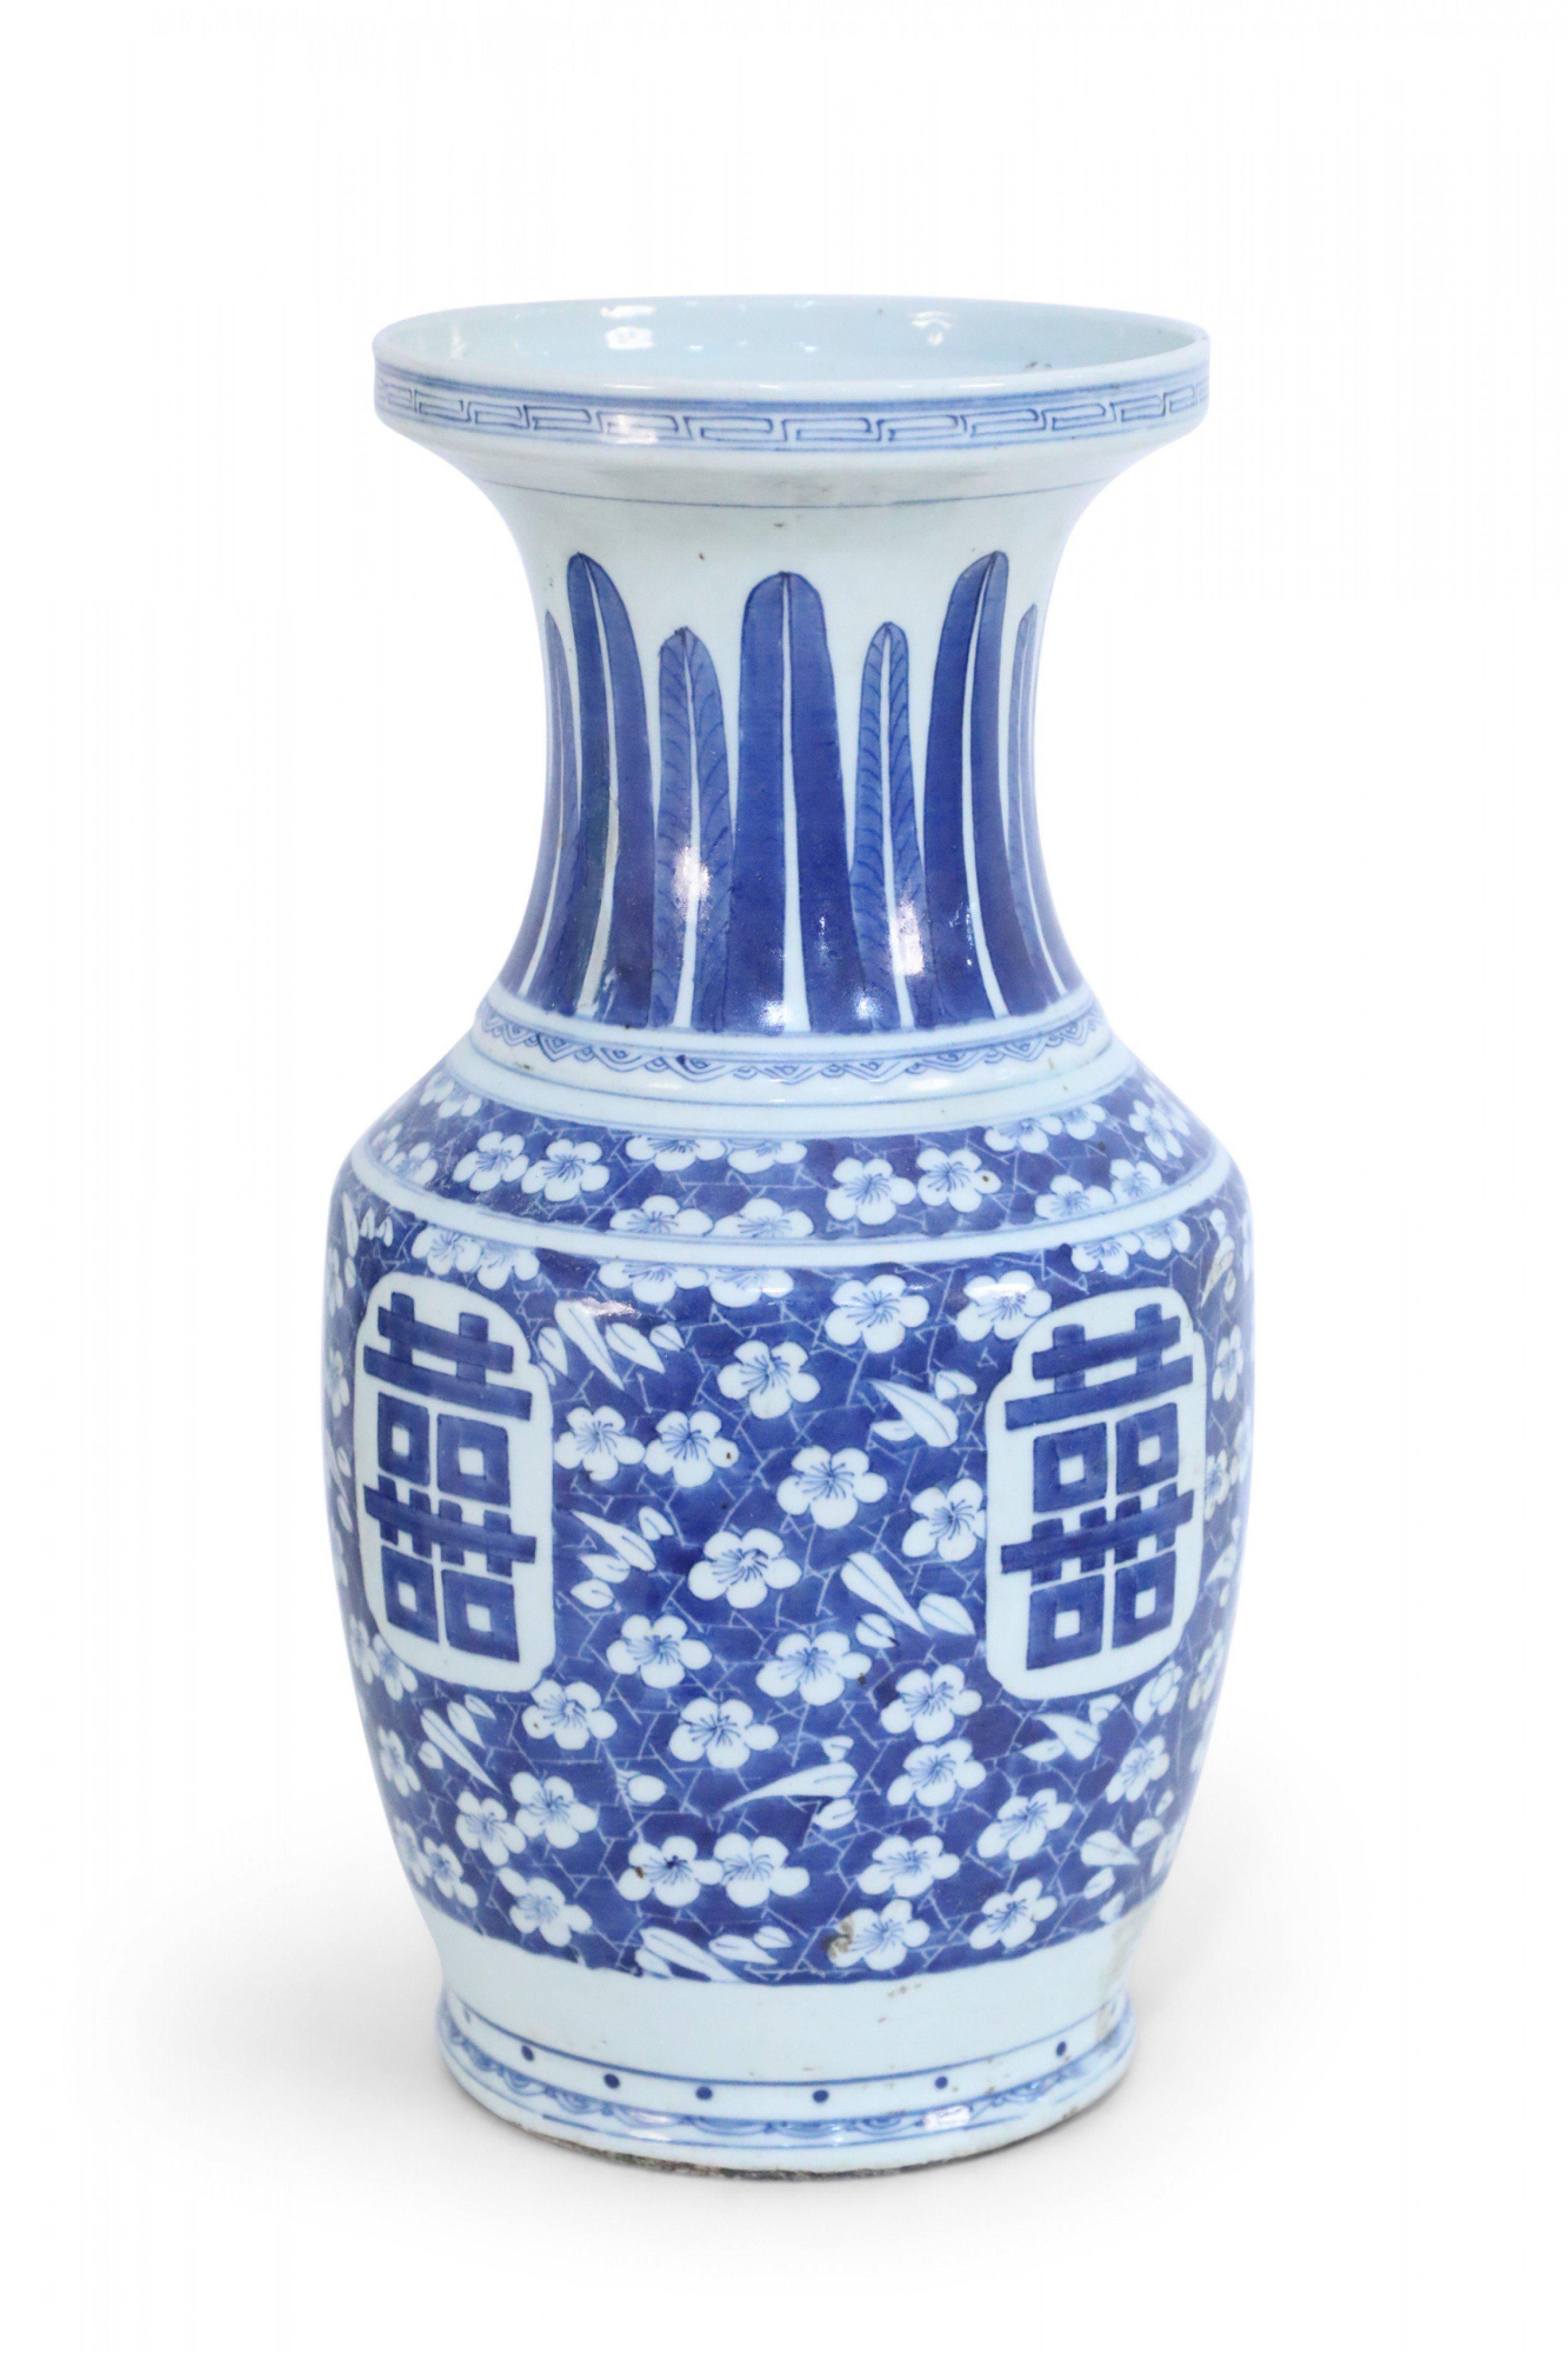 Chinese White and Blue Feather and Floral Motif Porcelain Urn In Good Condition For Sale In New York, NY